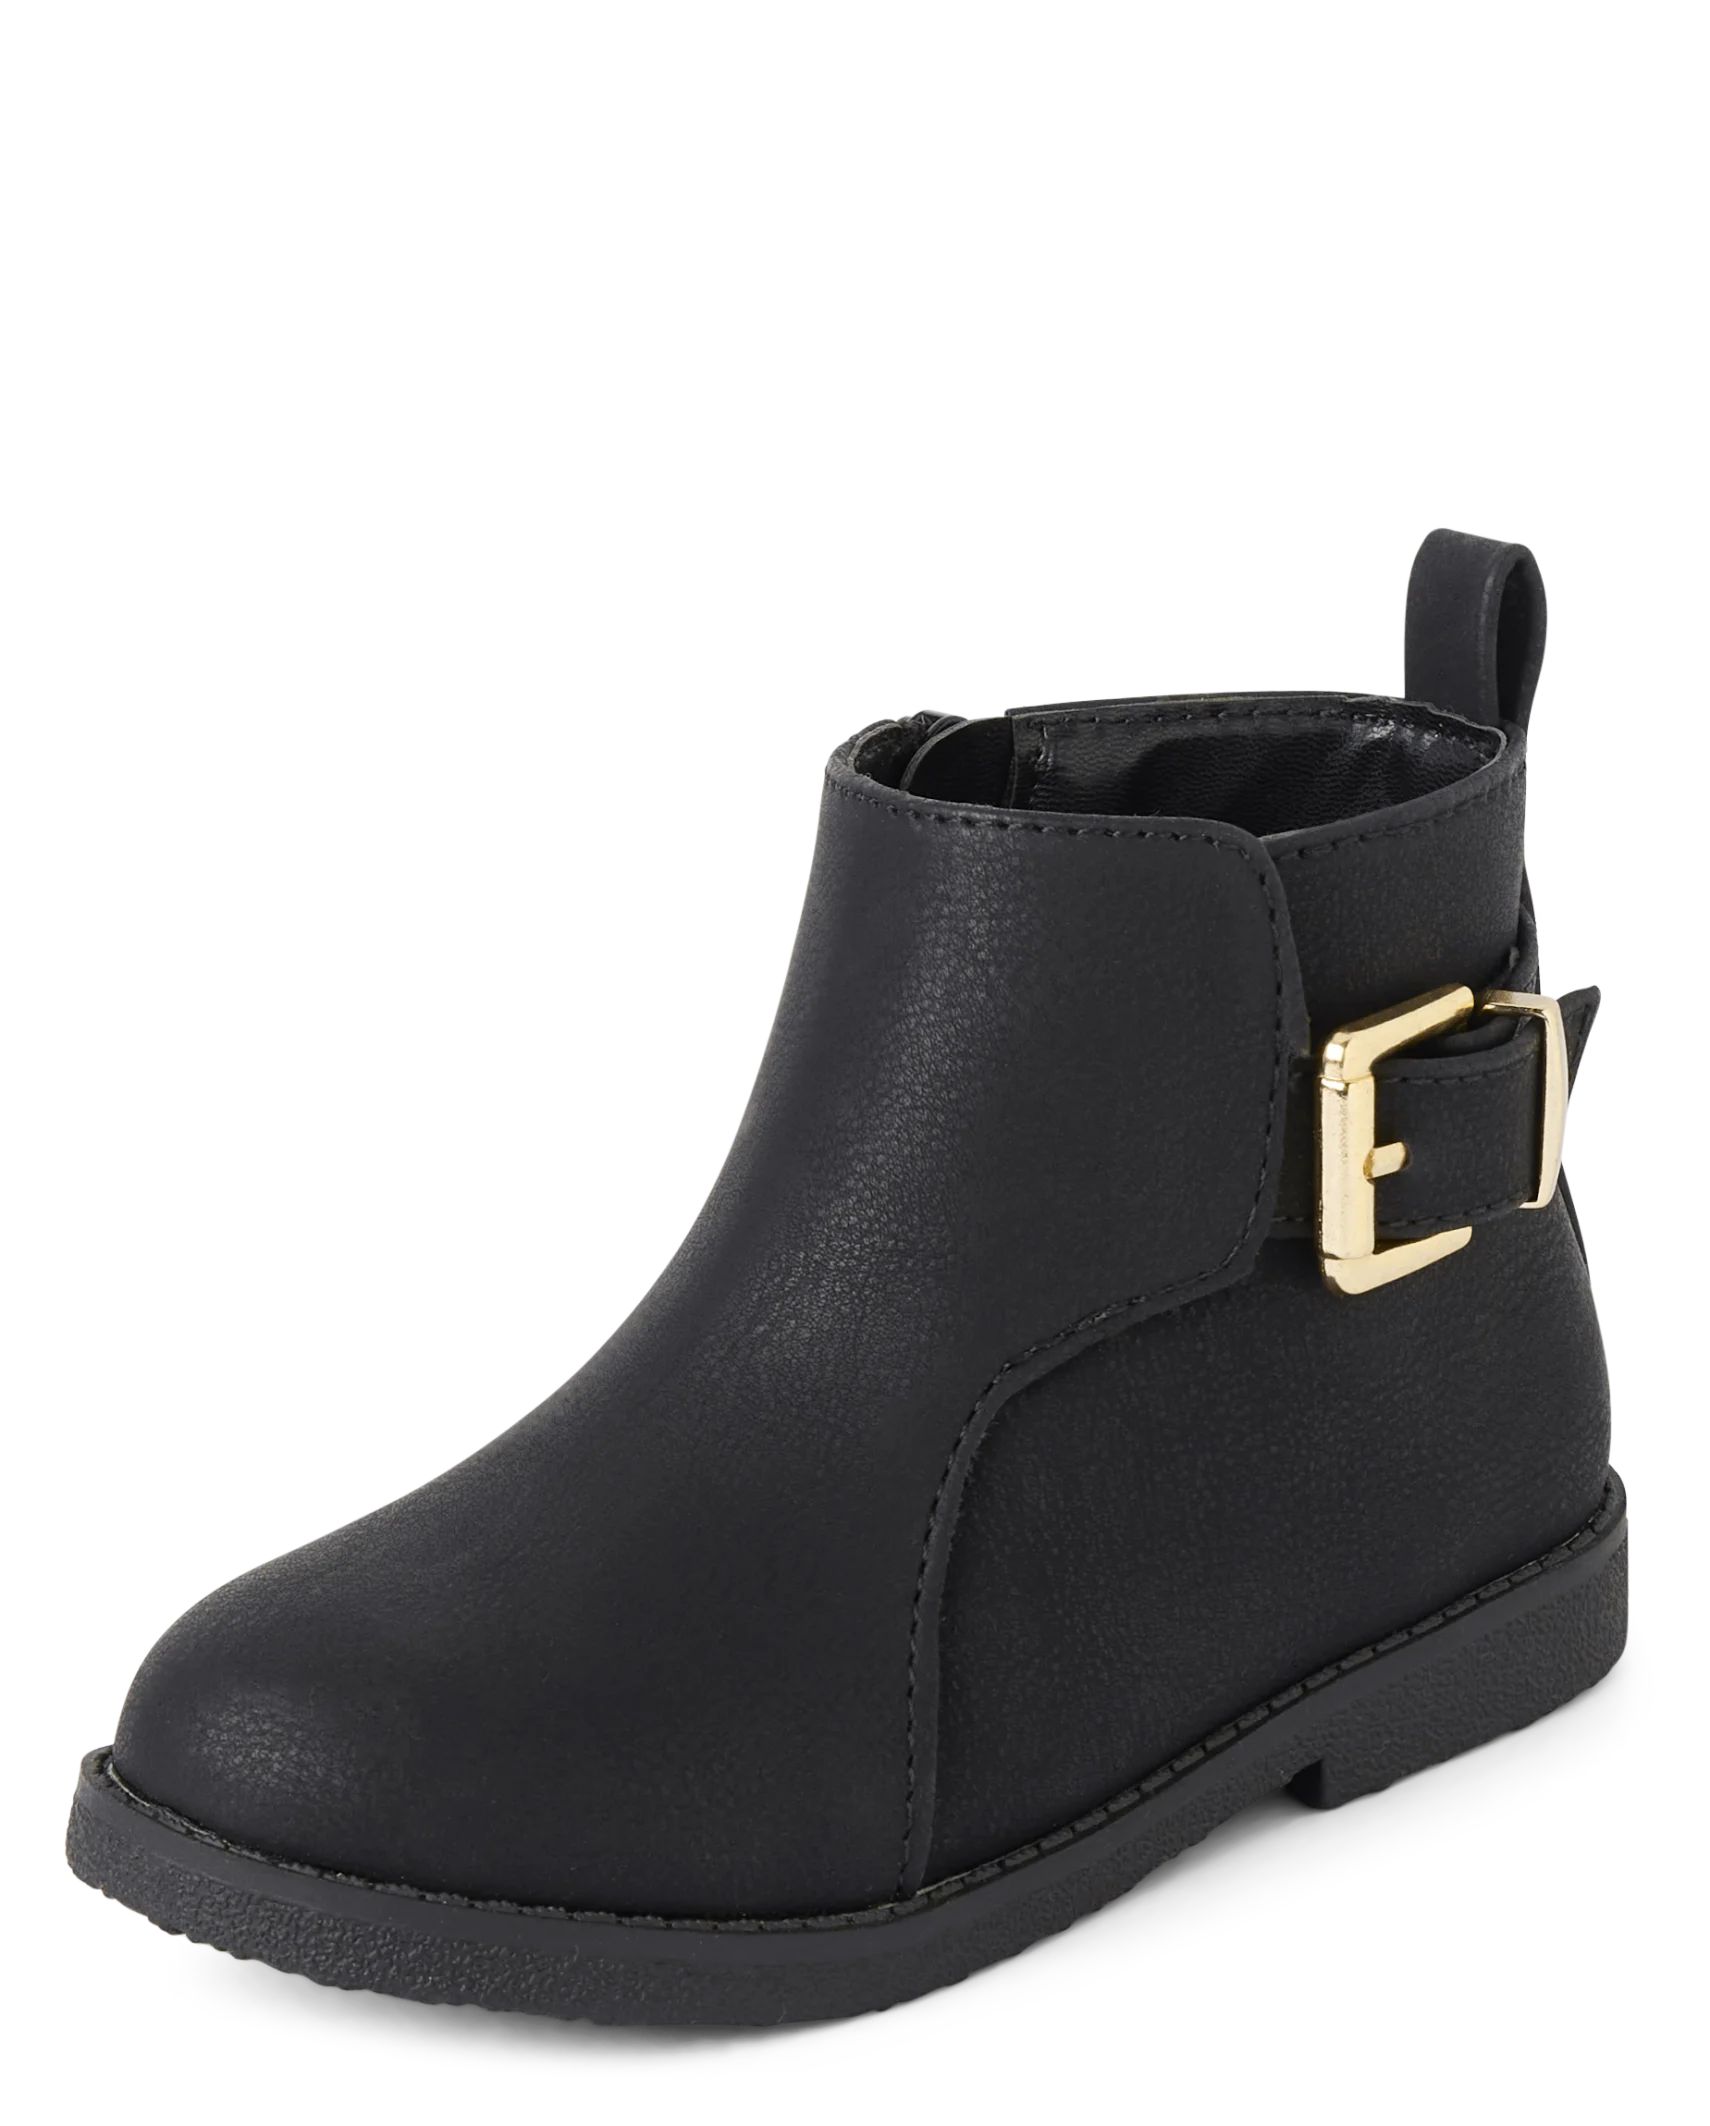 Toddler Girls Buckle Booties - black | The Children's Place